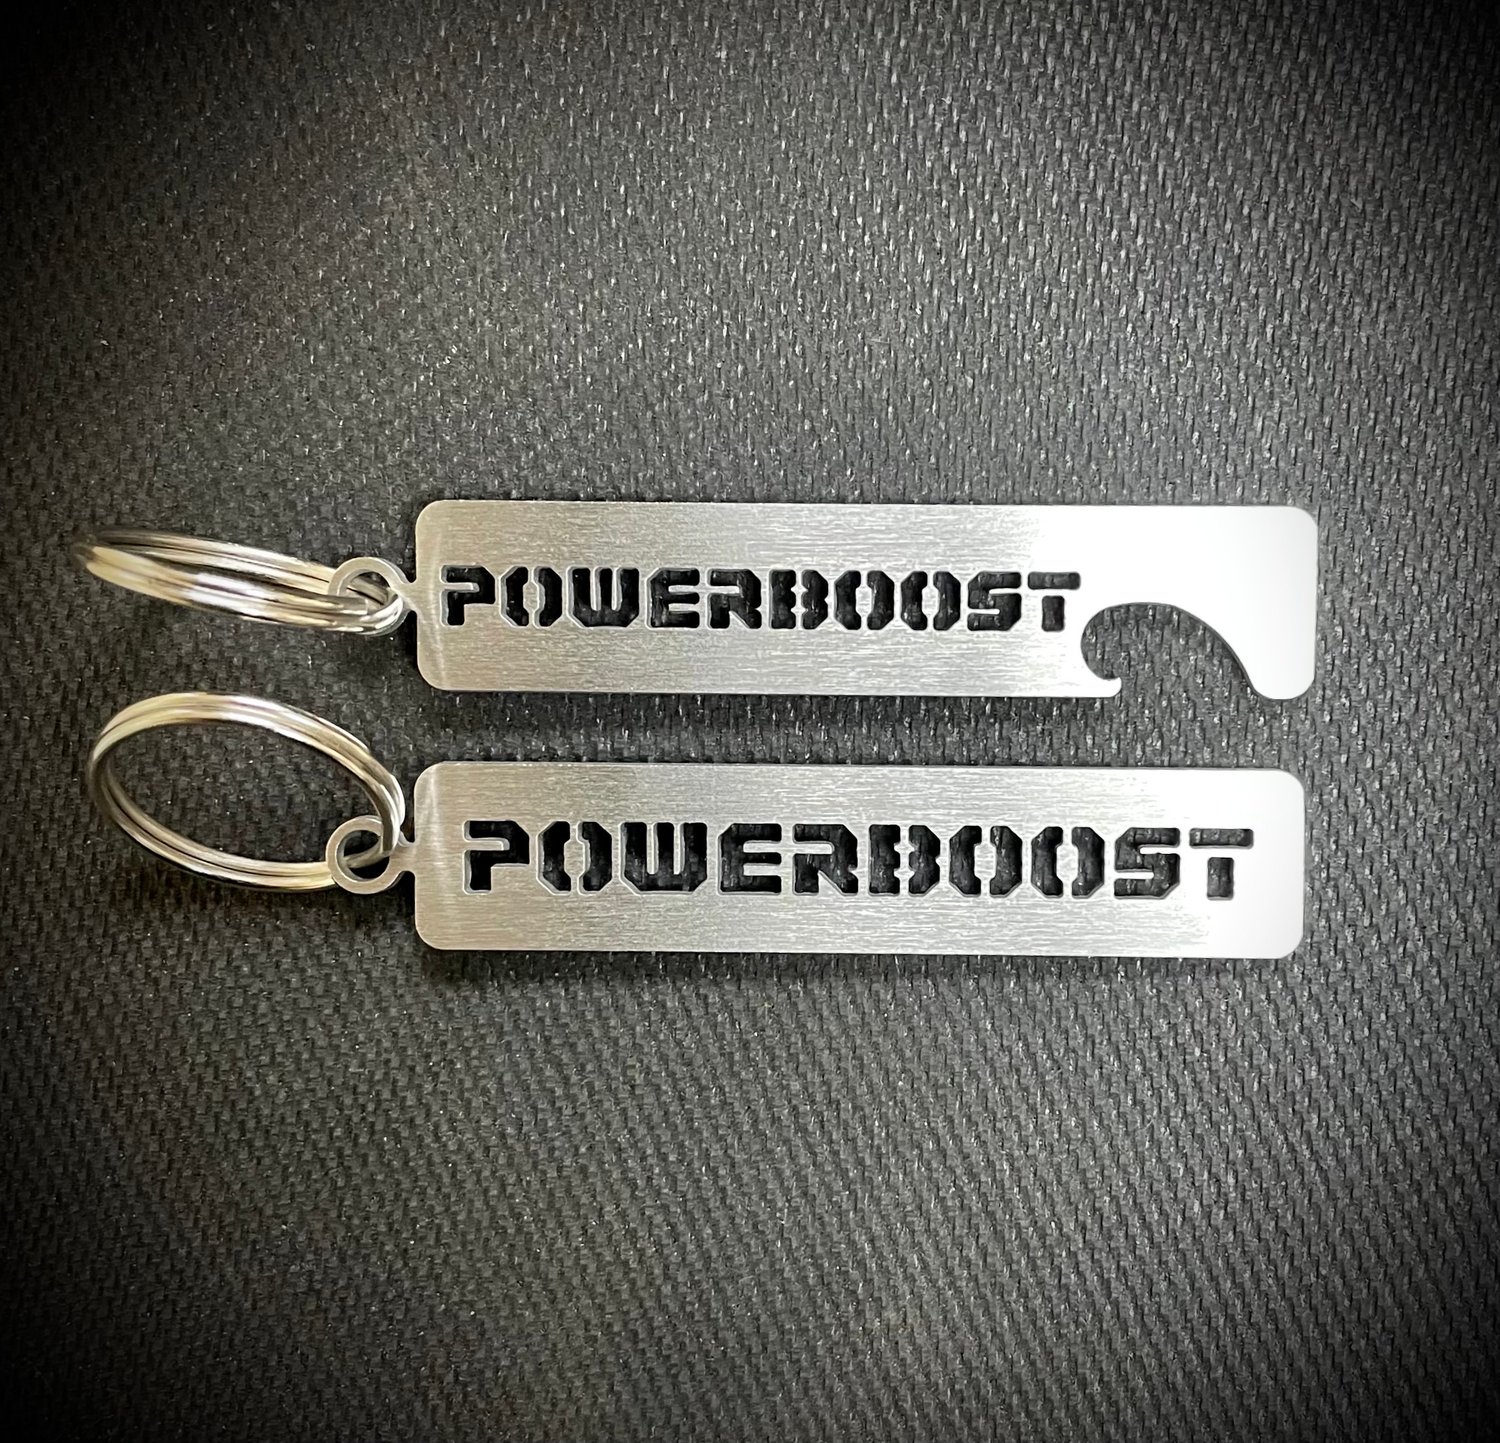 For Powerboost Enthusiasts 